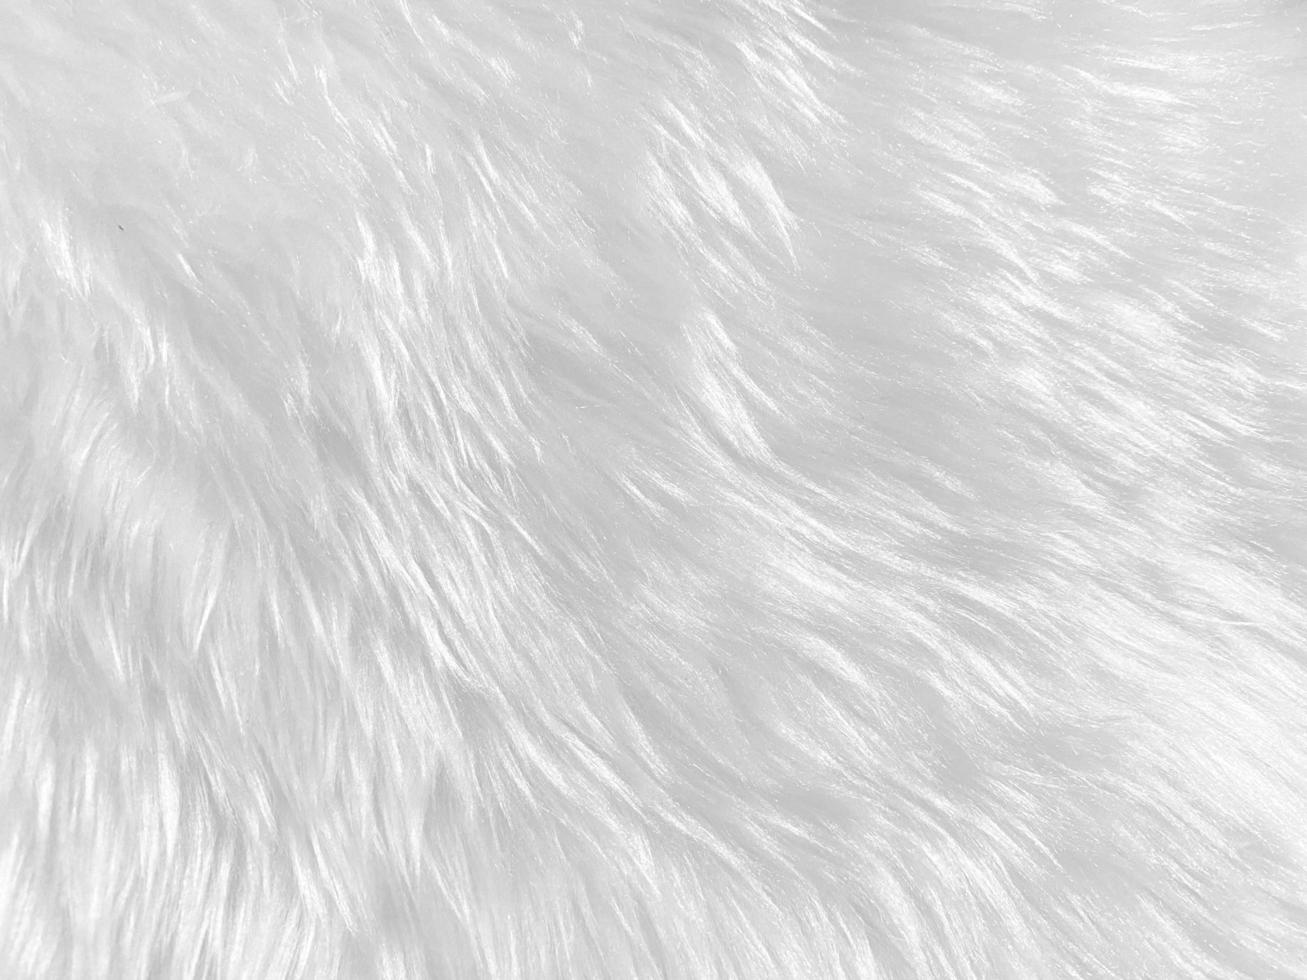 White clean wool  texture background. light natural sheep wool. white seamless cotton. texture of fluffy fur for designers. close-up fragment white wool carpet. photo